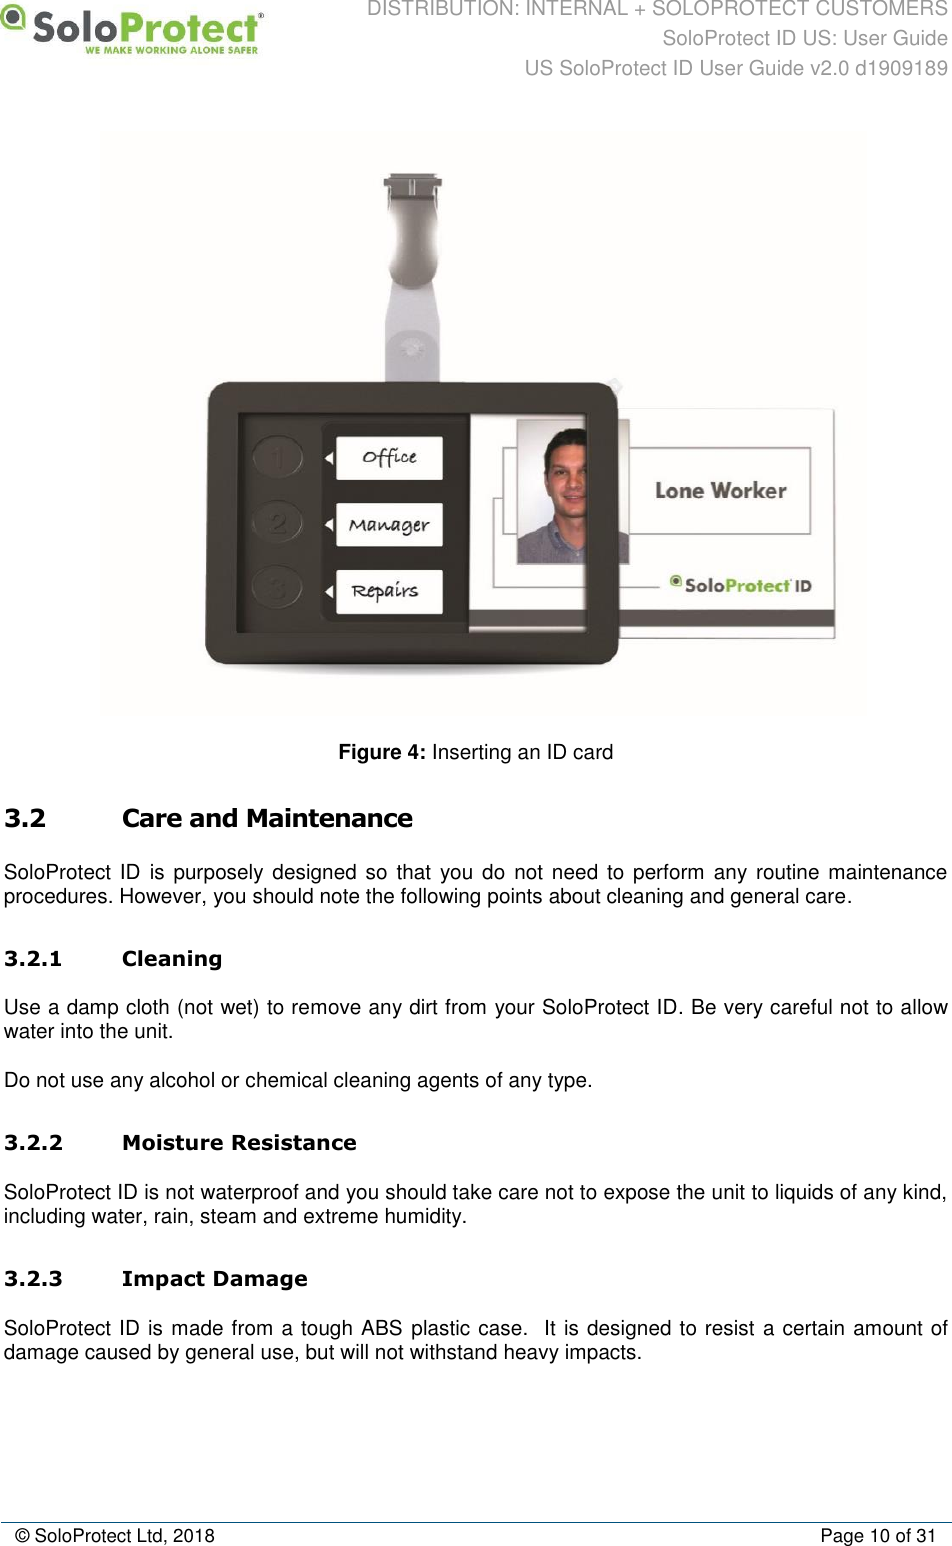 DISTRIBUTION: INTERNAL + SOLOPROTECT CUSTOMERS SoloProtect ID US: User Guide US SoloProtect ID User Guide v2.0 d1909189  © SoloProtect Ltd, 2018  Page 10 of 31  Figure 4: Inserting an ID card  3.2 Care and Maintenance SoloProtect ID is purposely  designed so that you do  not need to  perform any  routine maintenance procedures. However, you should note the following points about cleaning and general care. 3.2.1 Cleaning Use a damp cloth (not wet) to remove any dirt from your SoloProtect ID. Be very careful not to allow water into the unit. Do not use any alcohol or chemical cleaning agents of any type. 3.2.2 Moisture Resistance SoloProtect ID is not waterproof and you should take care not to expose the unit to liquids of any kind, including water, rain, steam and extreme humidity. 3.2.3 Impact Damage SoloProtect ID is made from a tough ABS plastic case.  It is designed to resist a certain amount of damage caused by general use, but will not withstand heavy impacts. 